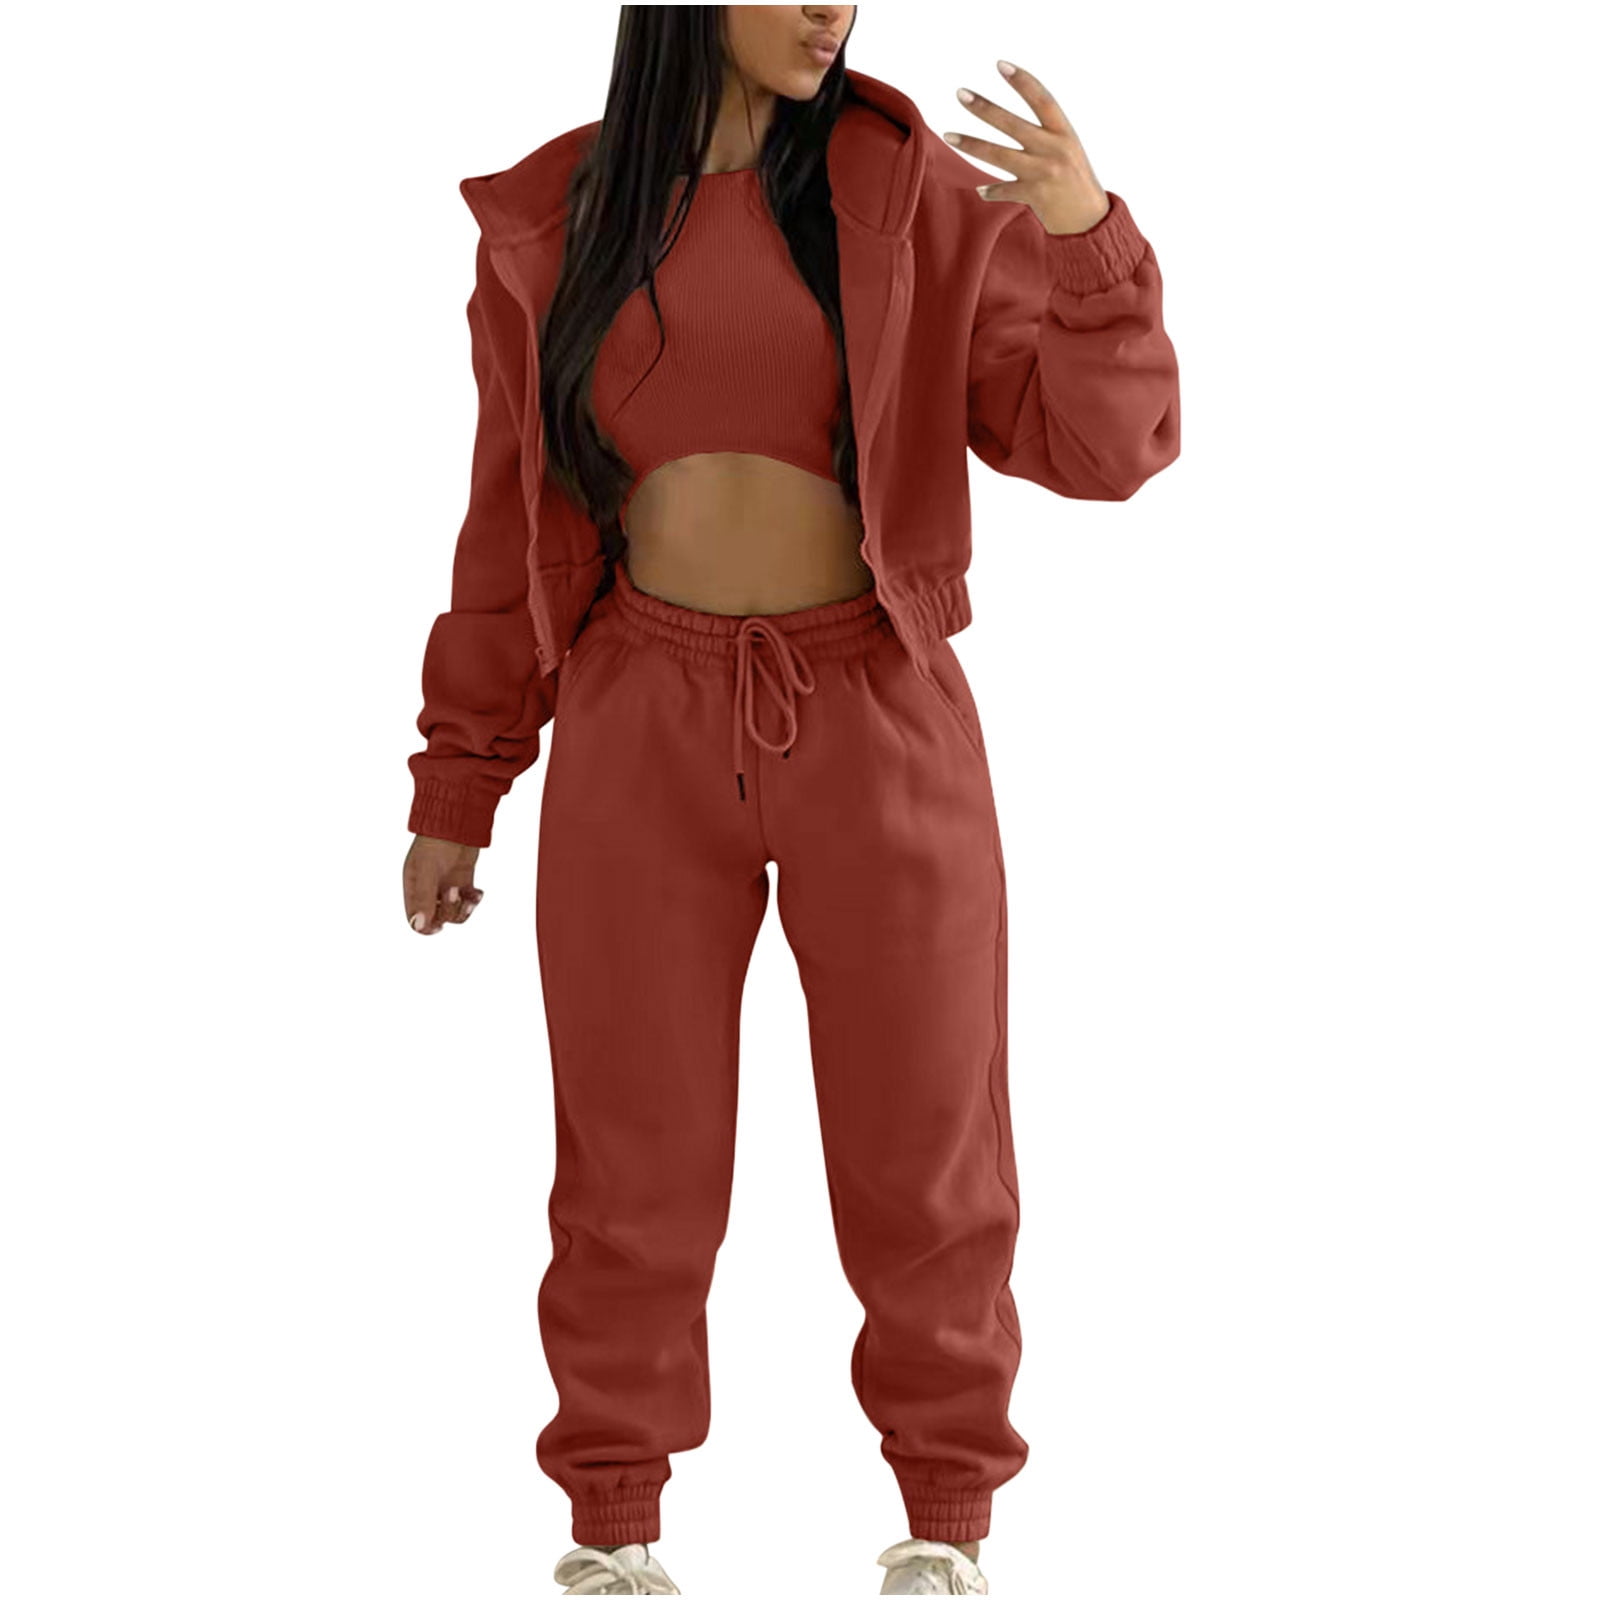 Sweatsuits for Womens 3 Piece Sports Outfits Fleece Hoodie Crop